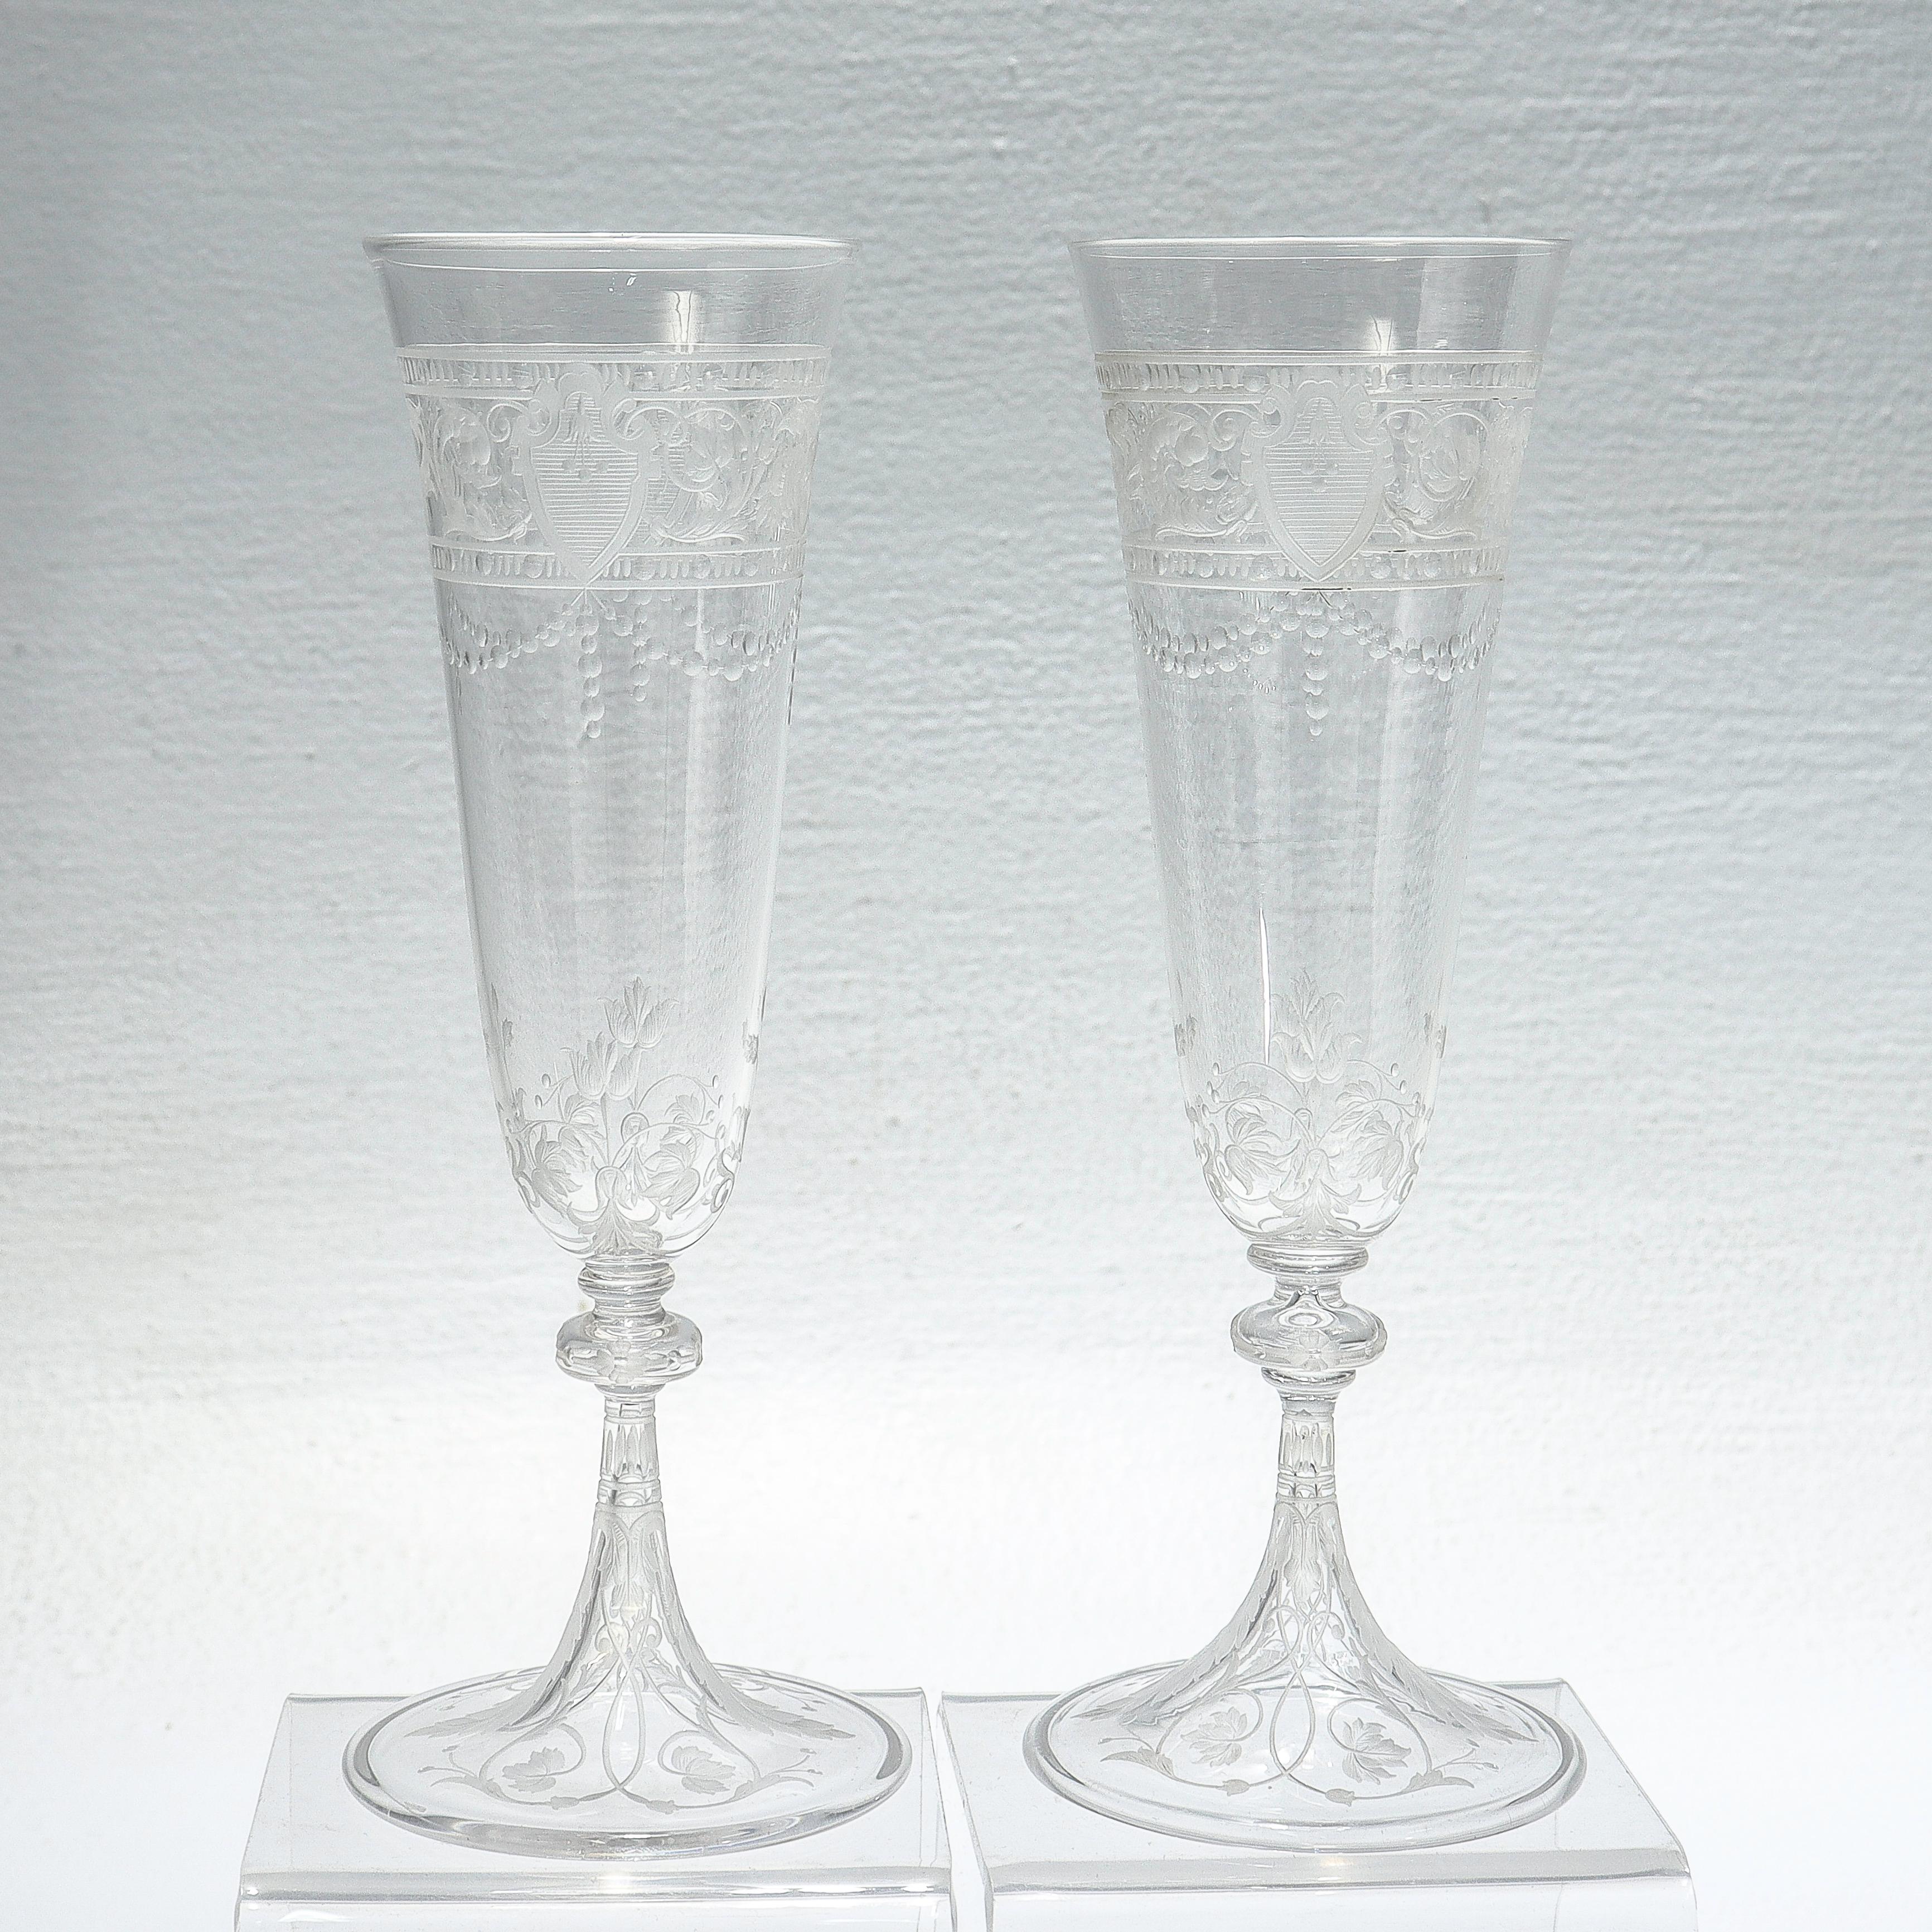 A fine pair or antique etched and engraved glass champagne flutes.

Attributed to Stevens & Williams or Webb.

With engraved & etched designs trelliswork, flowers, and shield devices.

Simply a wonderful pair of English art glass champagnes